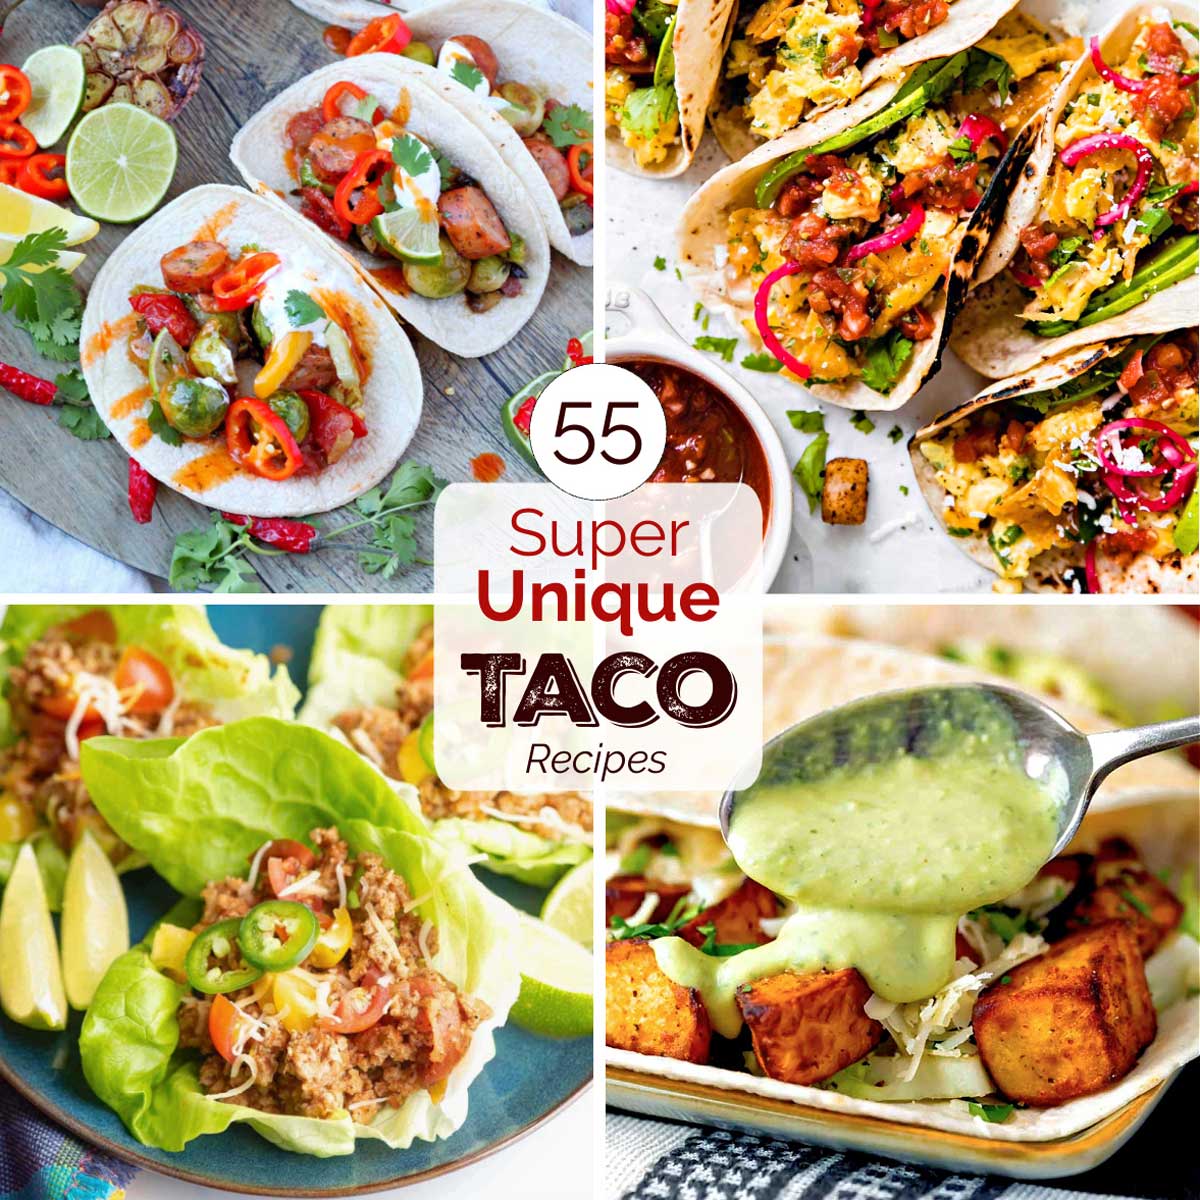 Square collage of 4 recipes with dark brown and red text "55 Super Unique TACO Recipes".